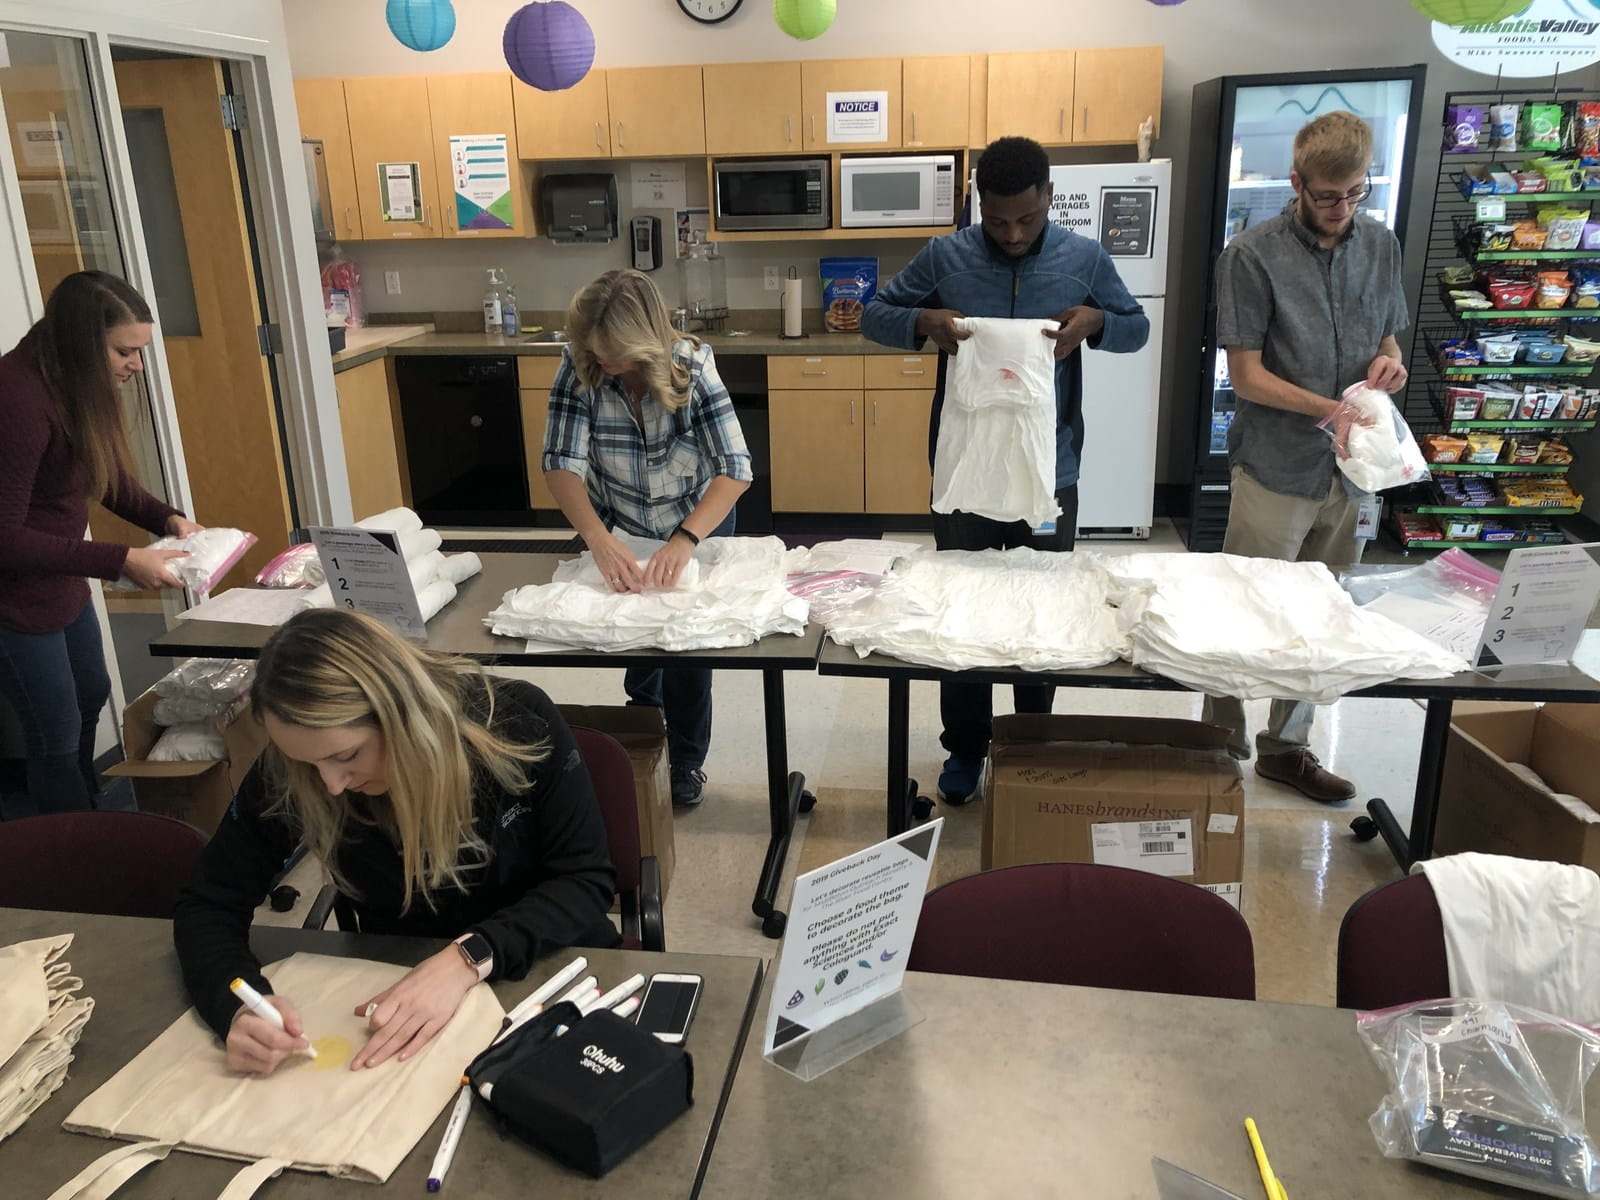 Decorating reusable tote bags at the Give Back Roadshow 2019